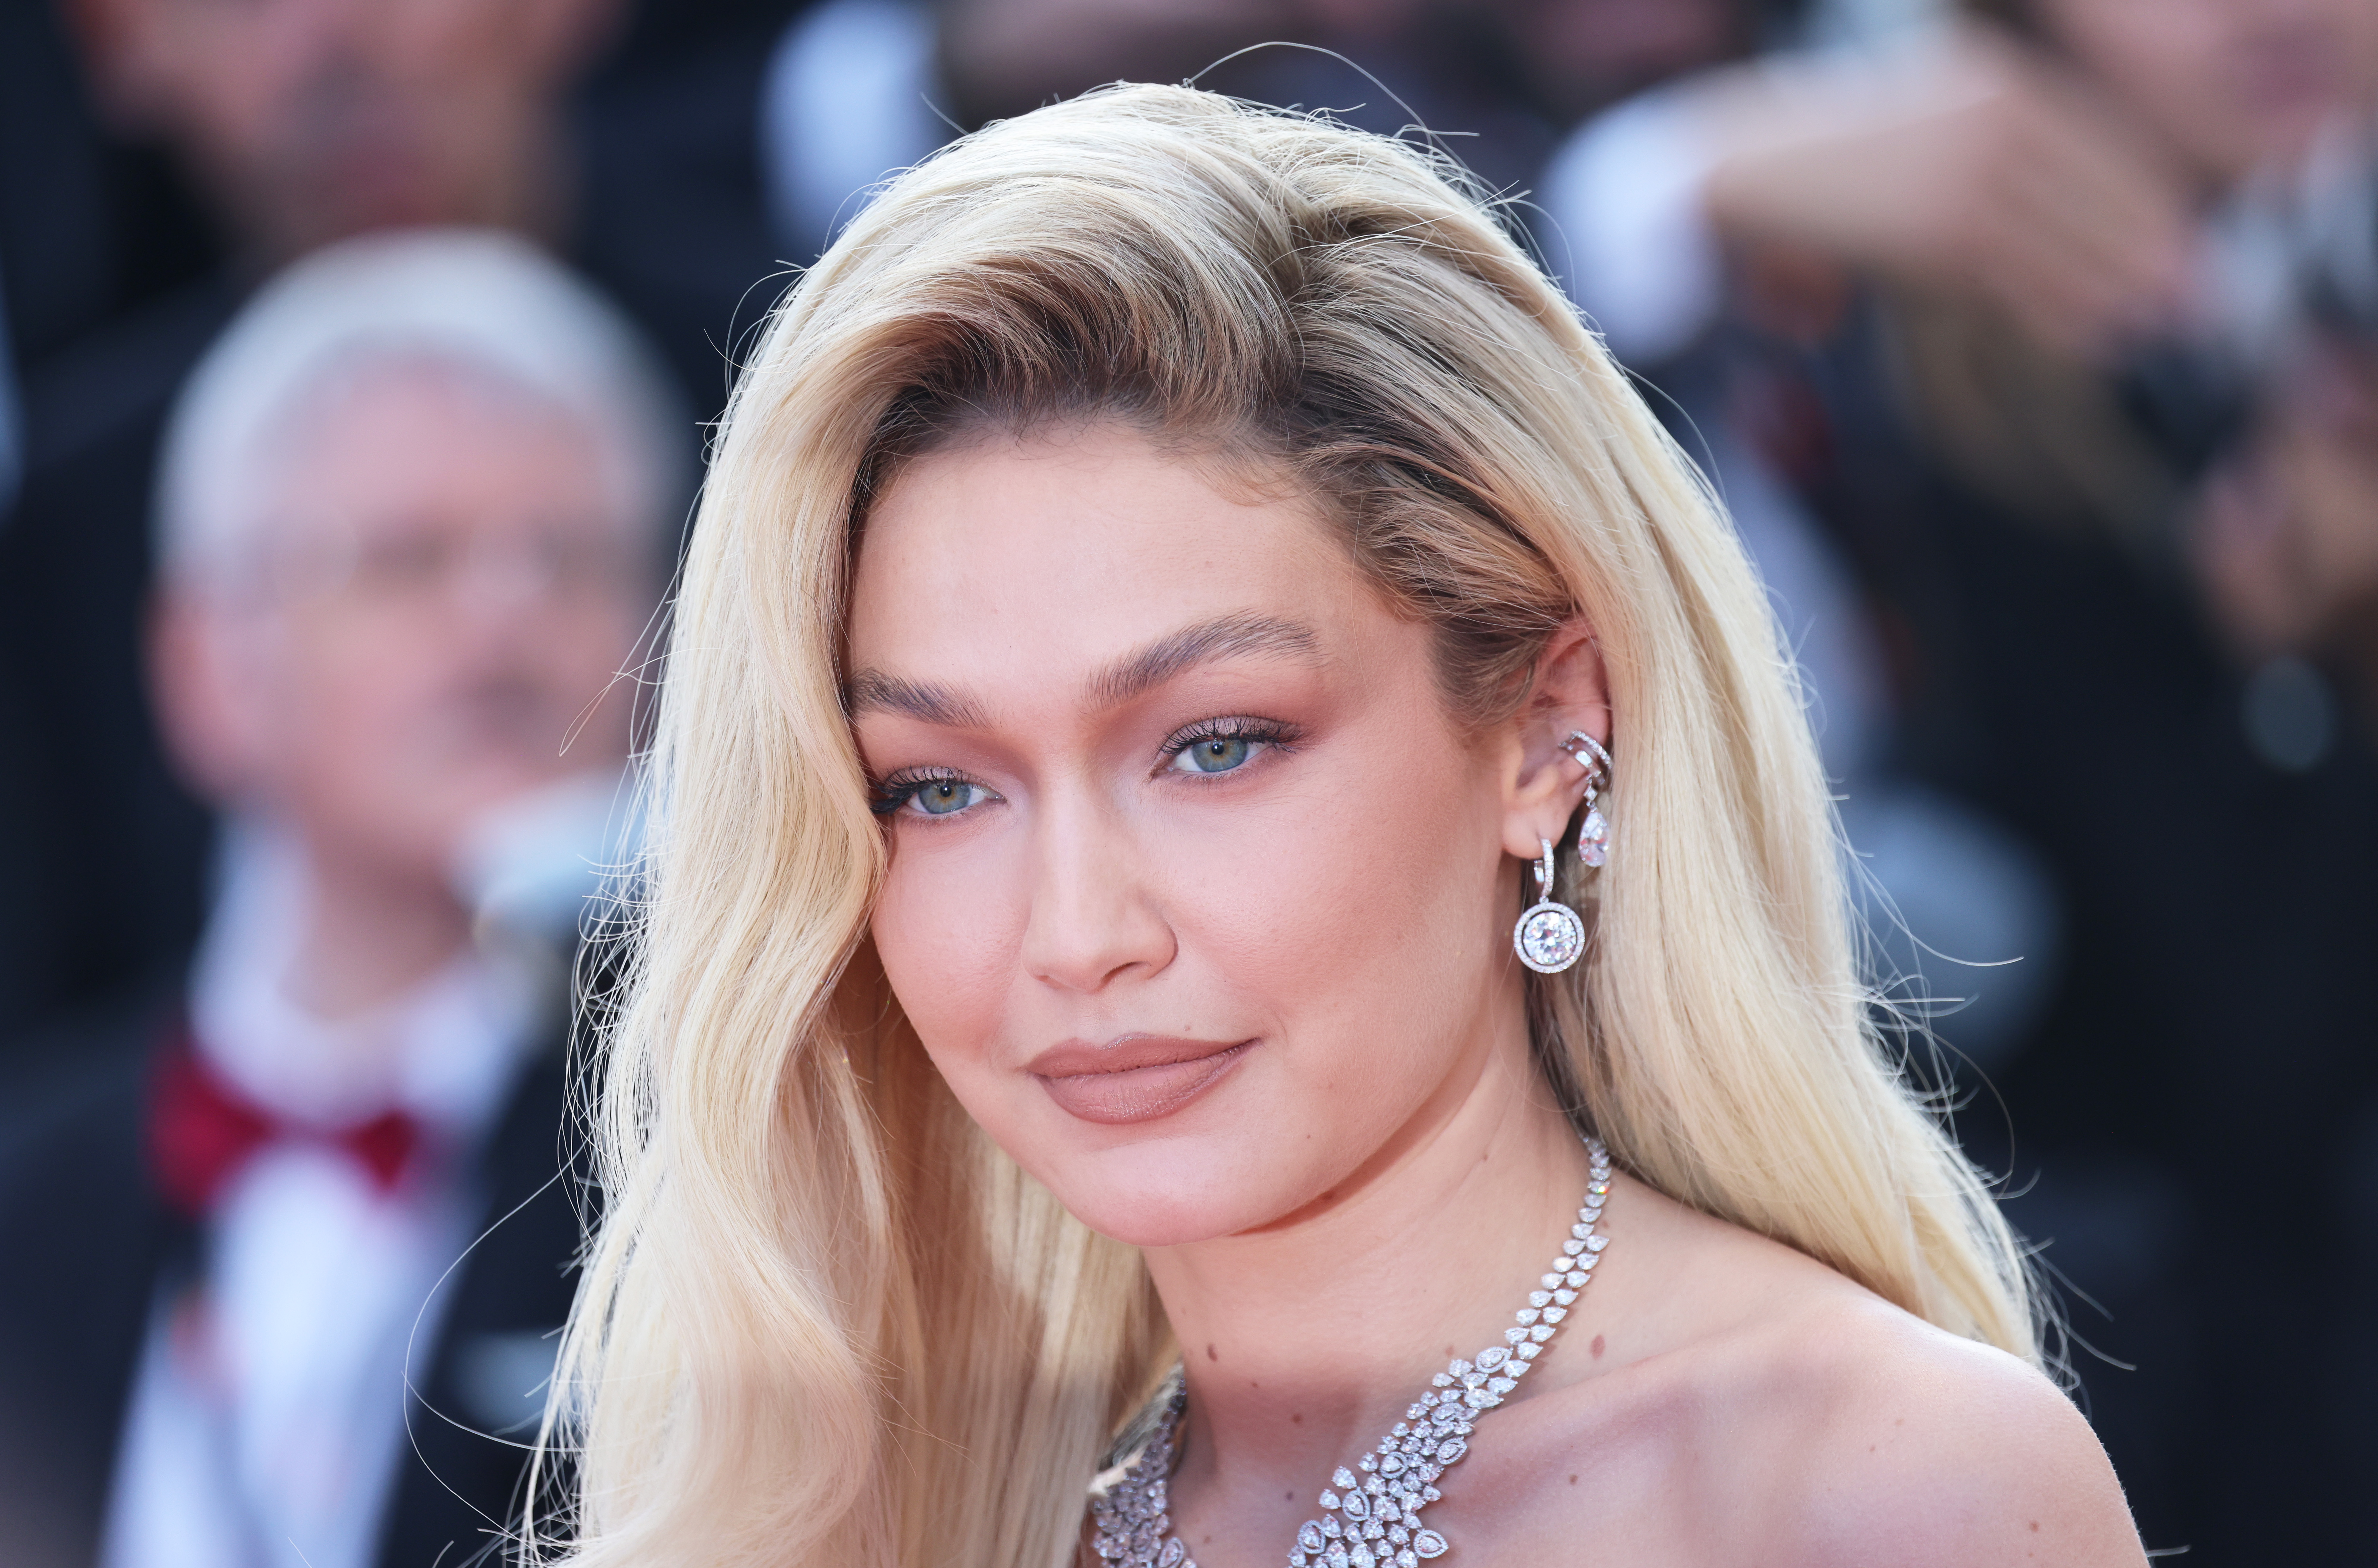 Gigi Hadid Pleads Guilty To Marijuana Possession, Pays $1K Fine During Cayman Islands Vacation